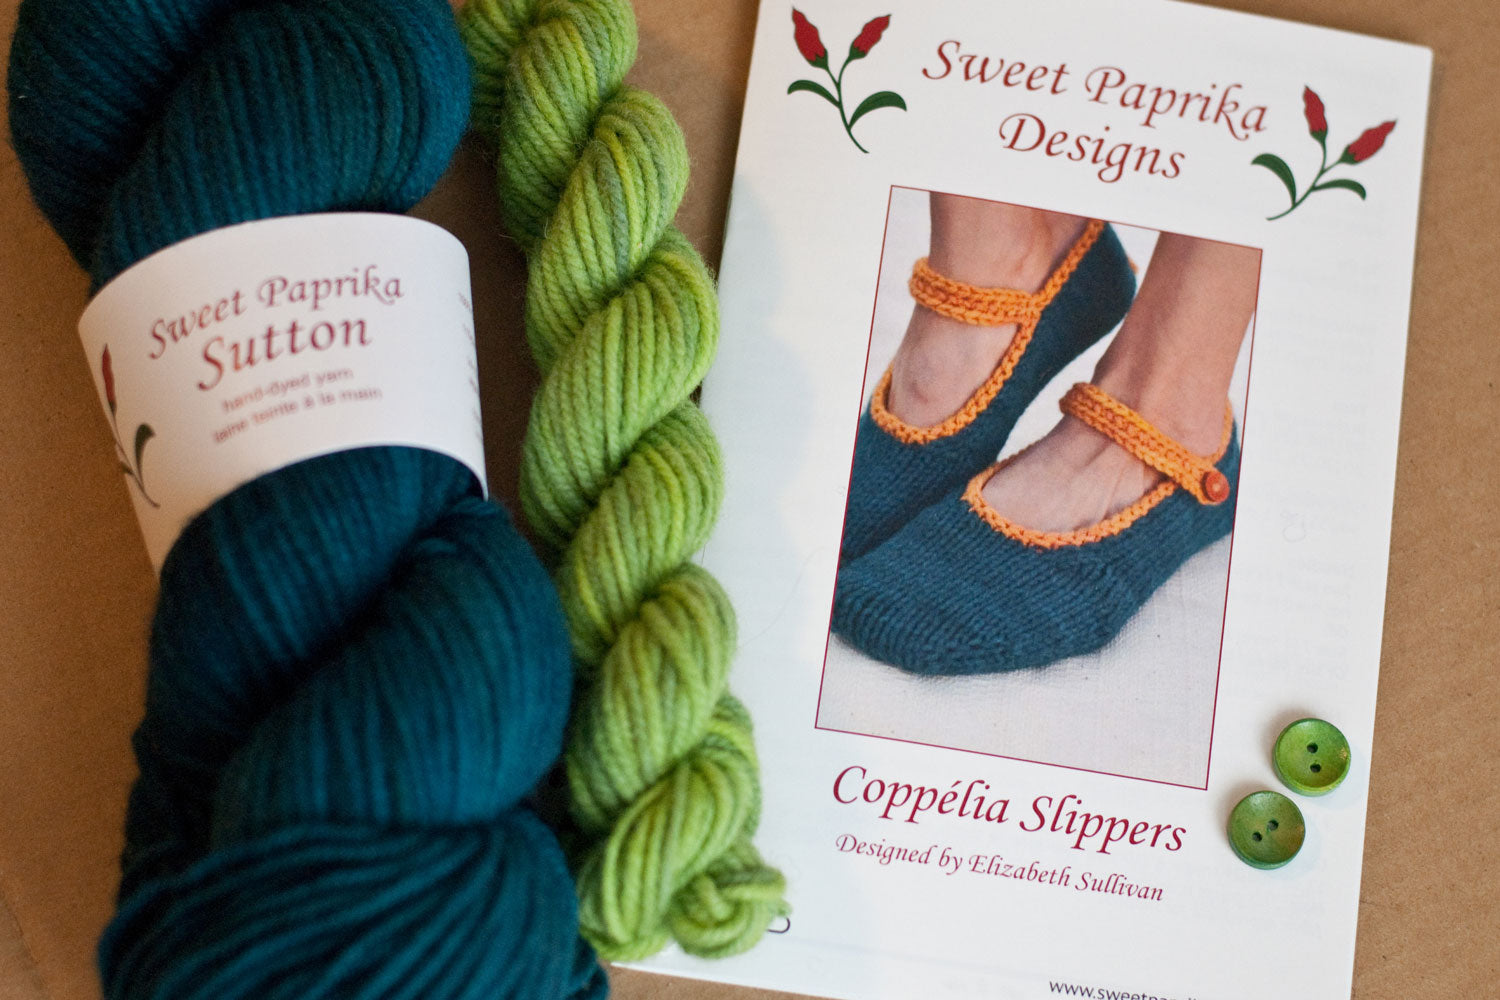 Kit components: knitting pattern, bulky yarn in teal and bright green, green buttons